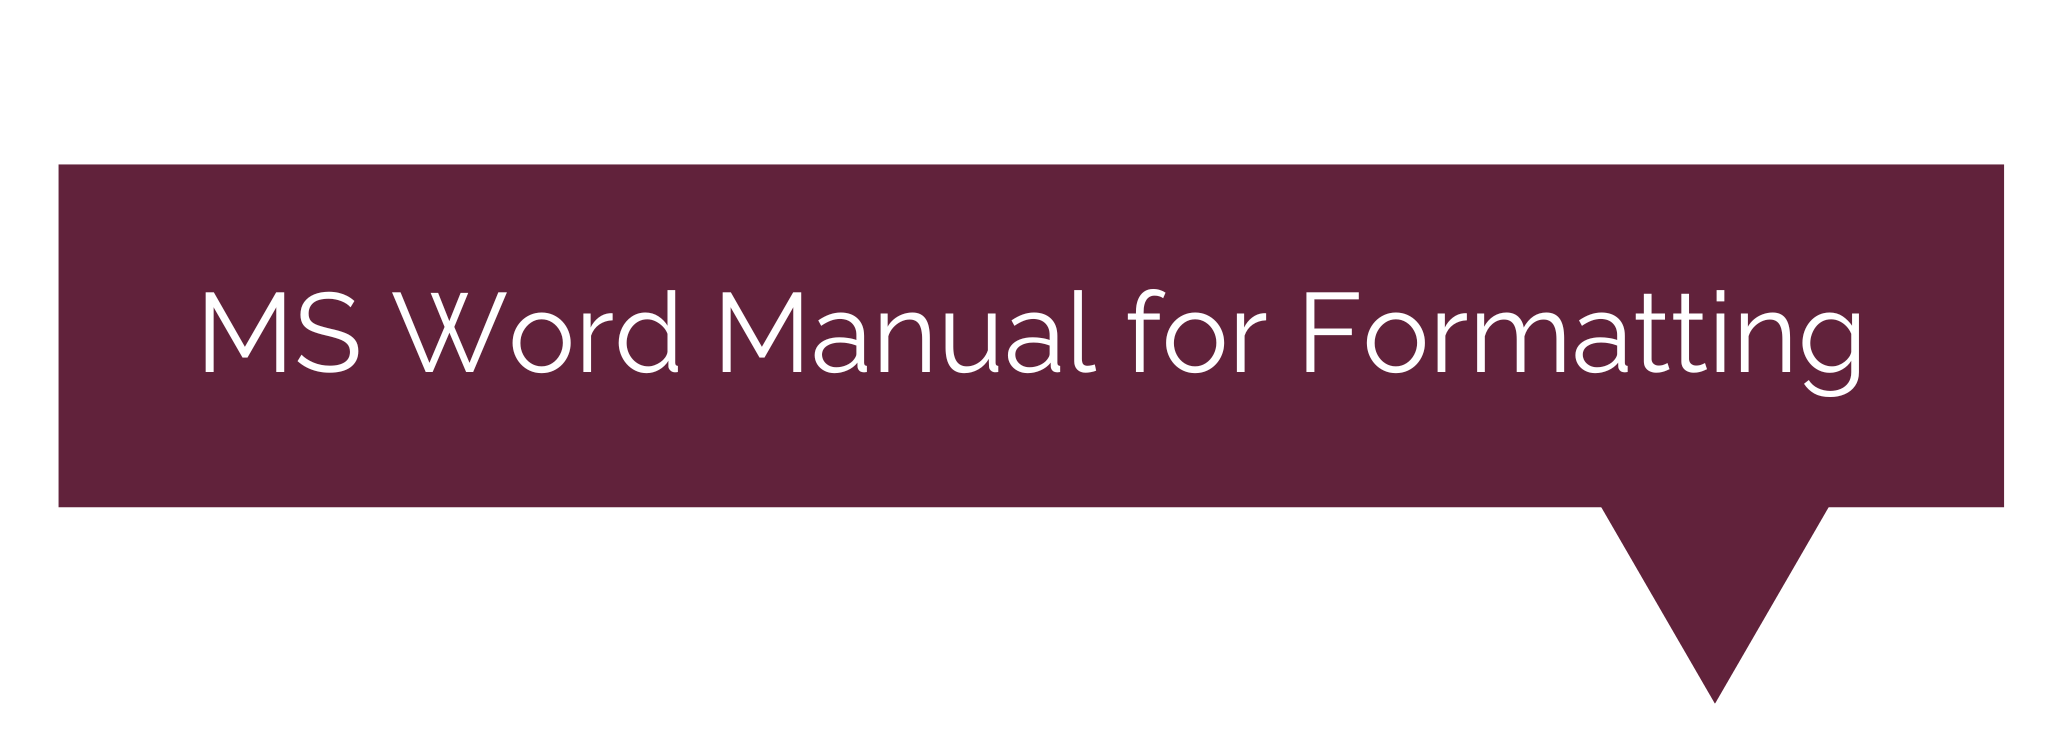 Manual for Formatting.png